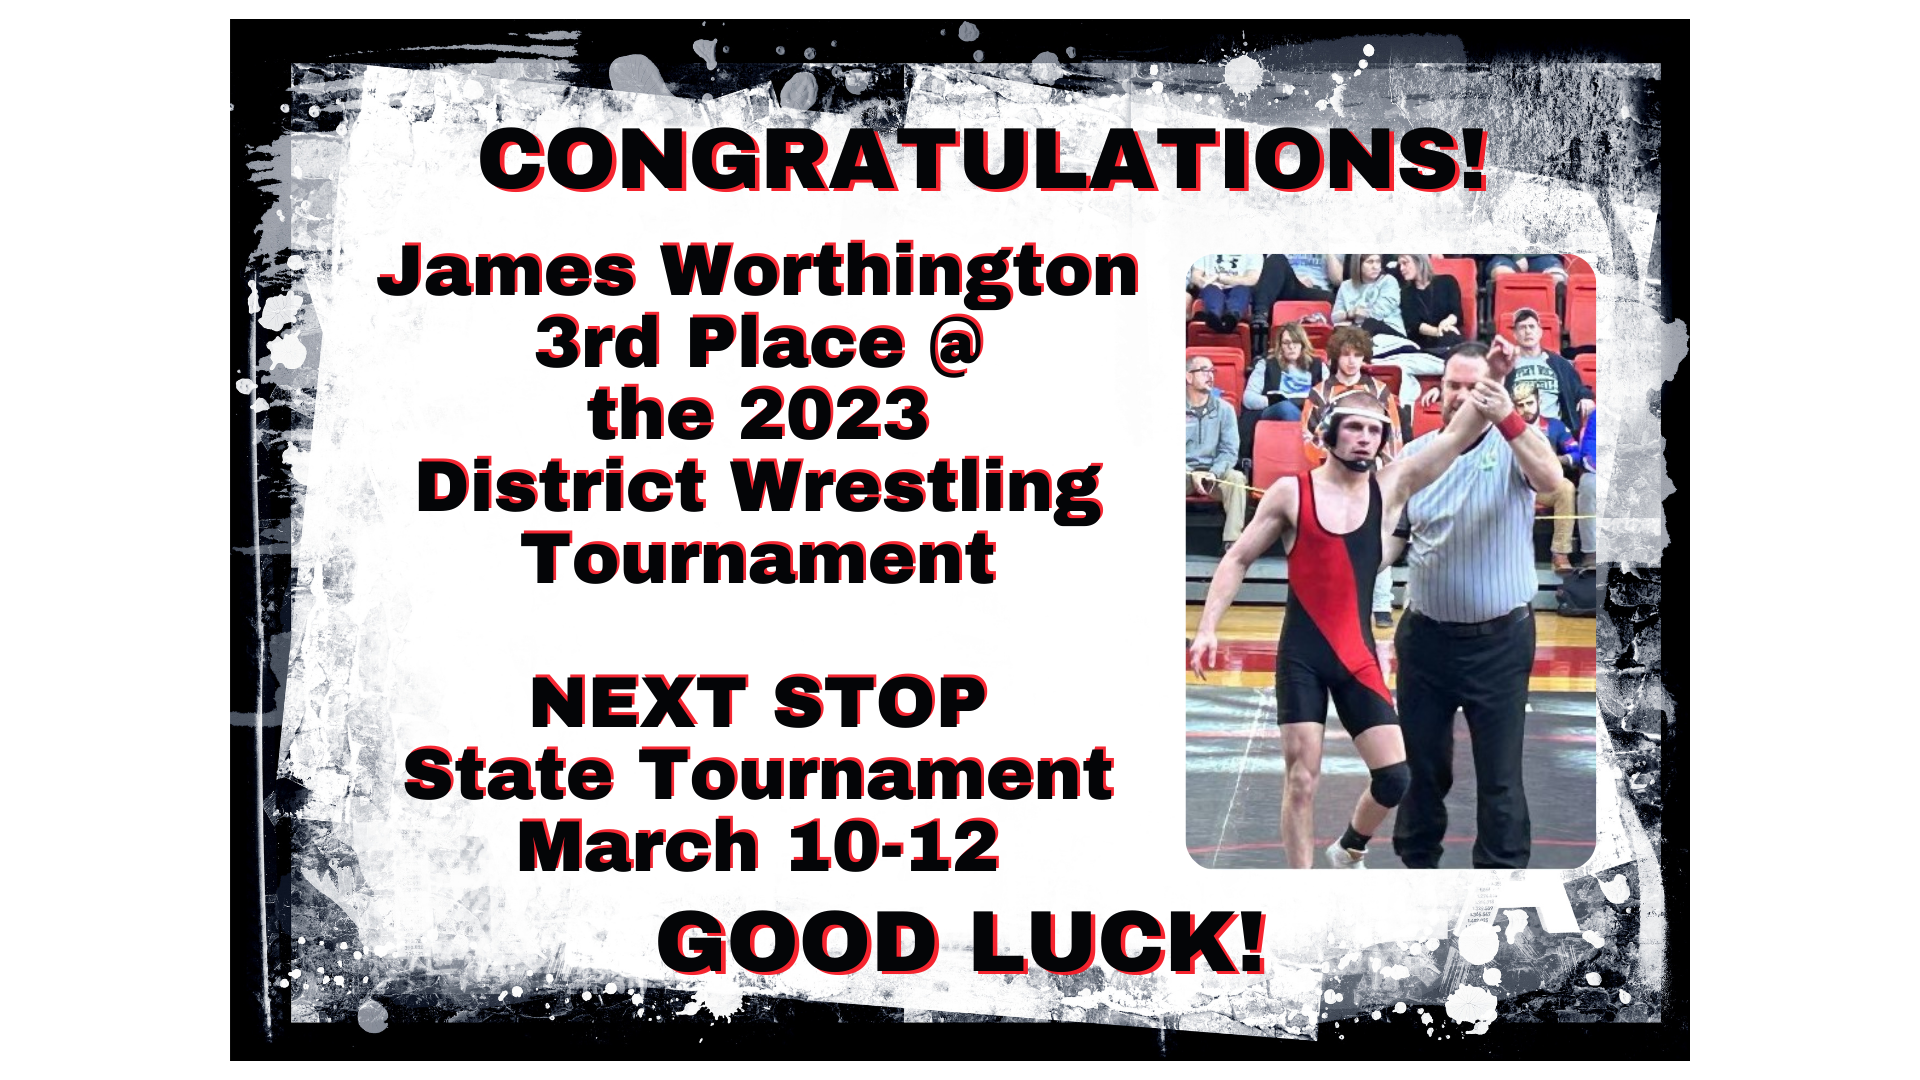 James Worthington places 3rd and is on to state!